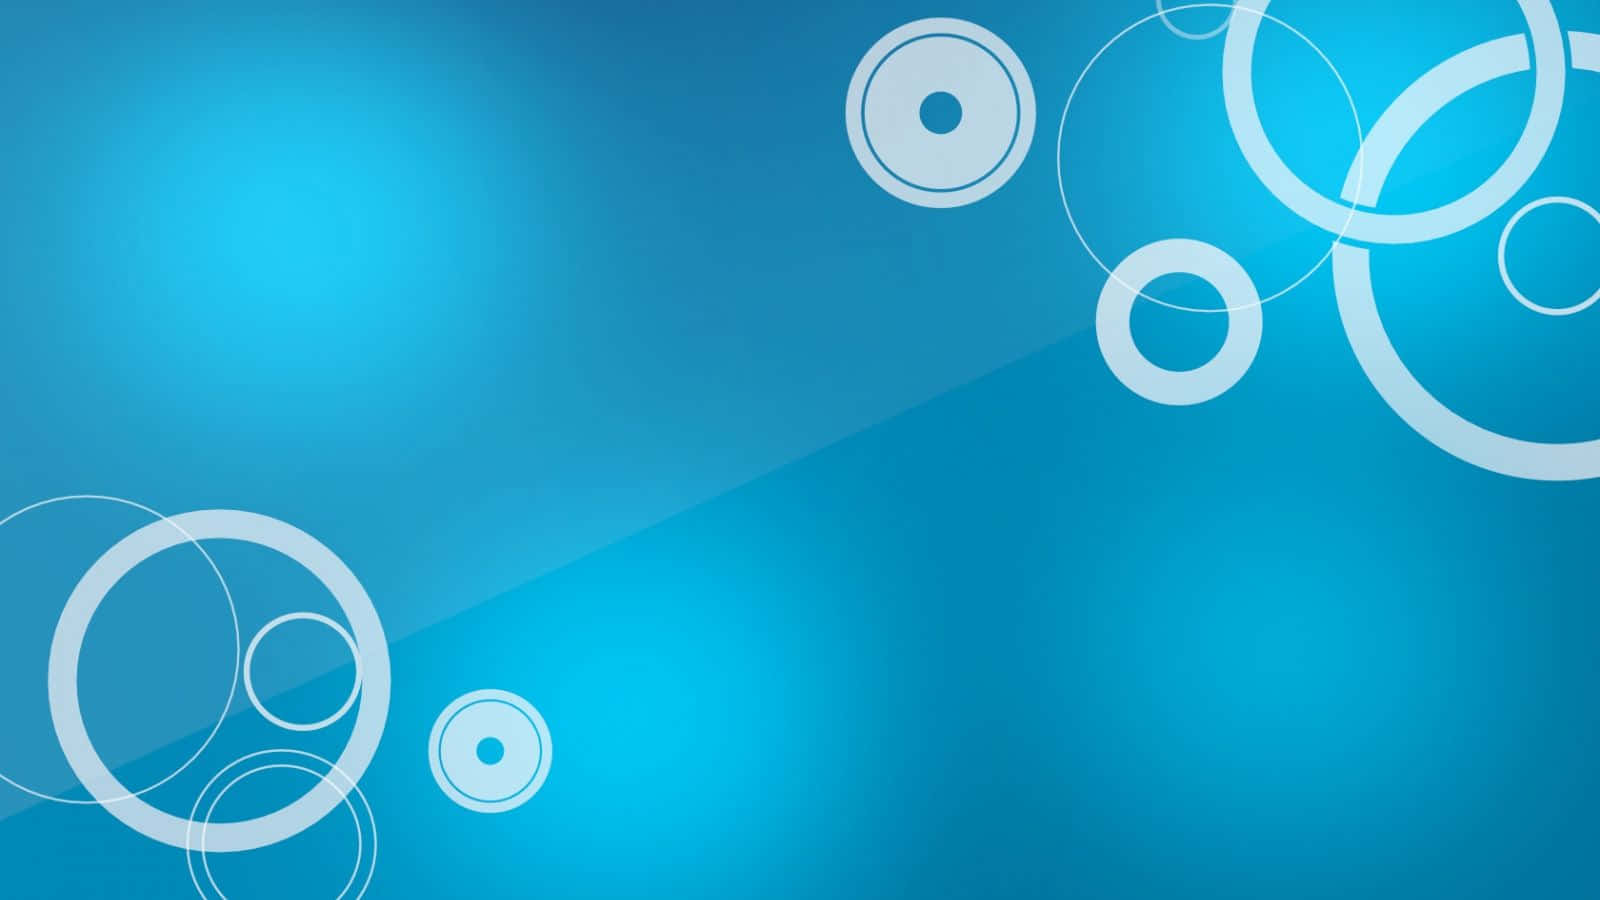 White Circles On Blue Vector Background